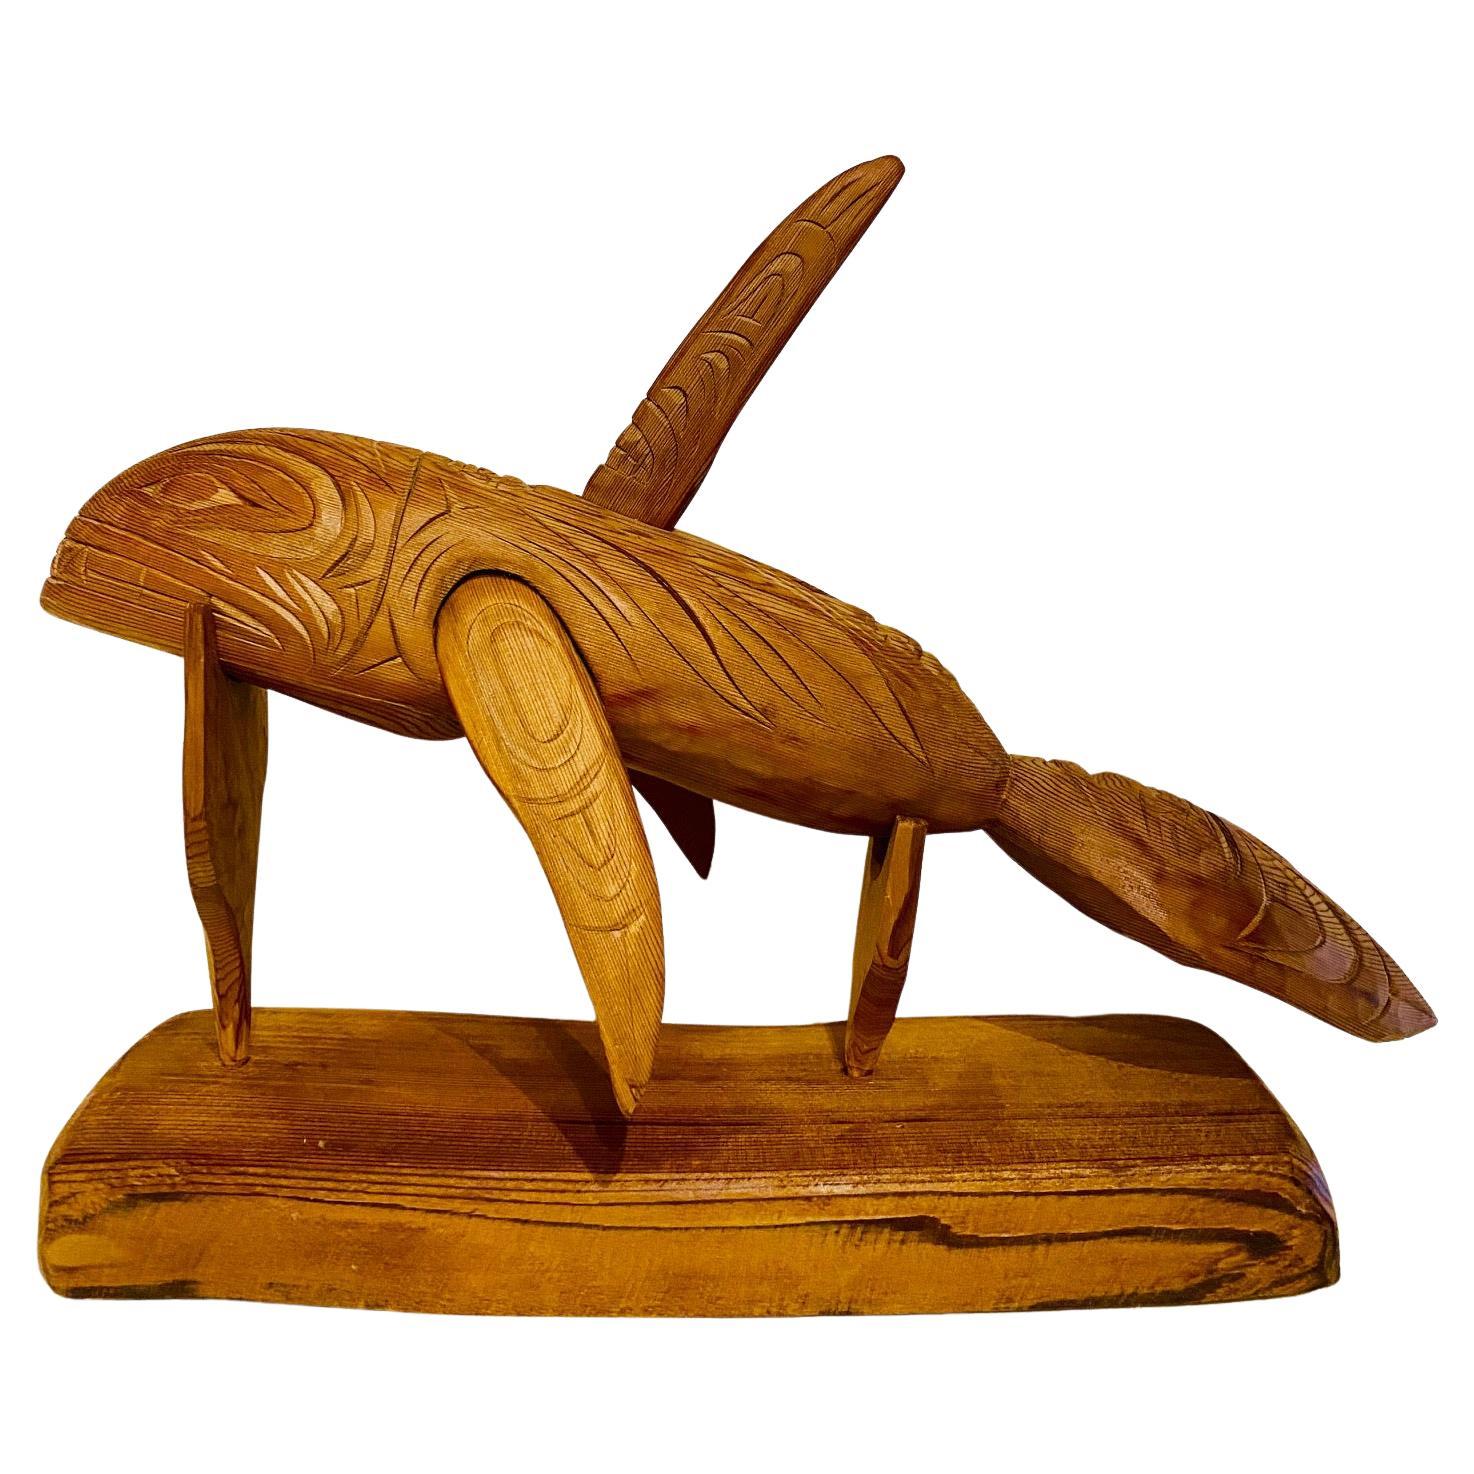 Pacific Northwest Coast Carved Cedar Killer Whale Rattle For Sale